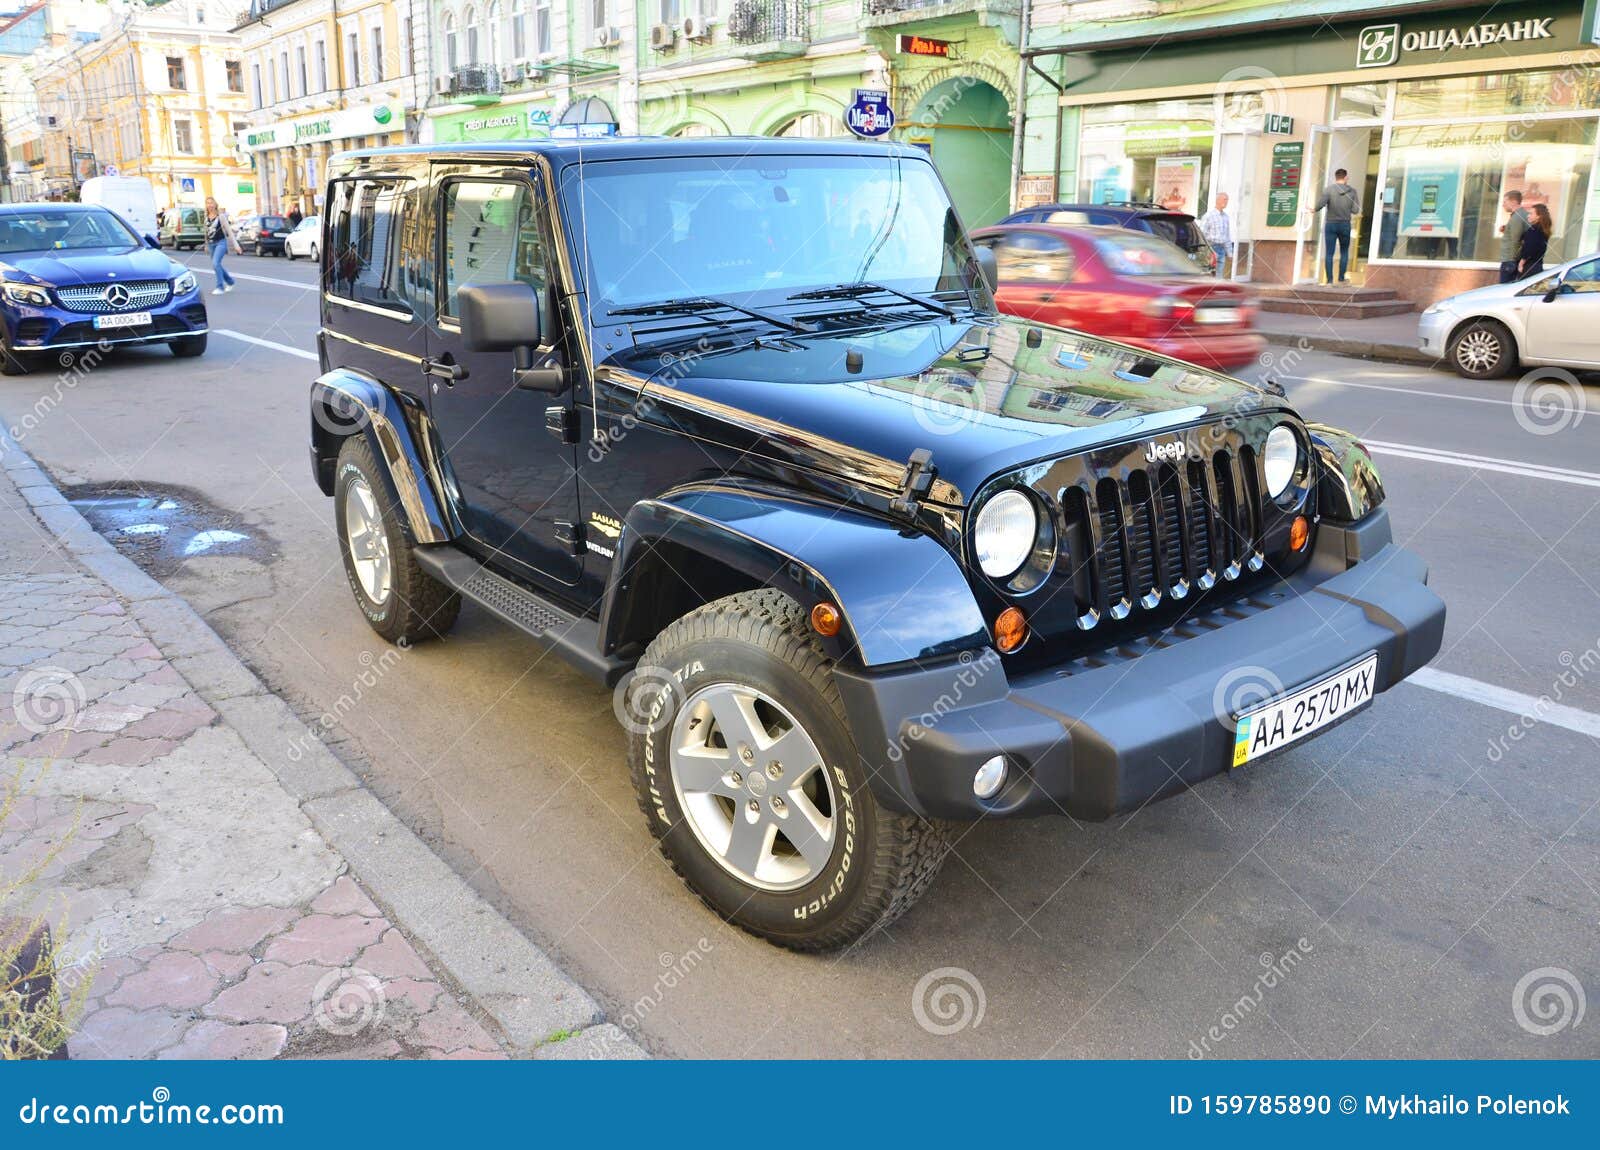 Jeep Wrangler Sahara Black with BFGoodrich All Terrain T a Tires on Kyiv  Street Editorial Image - Image of model, road: 159785890